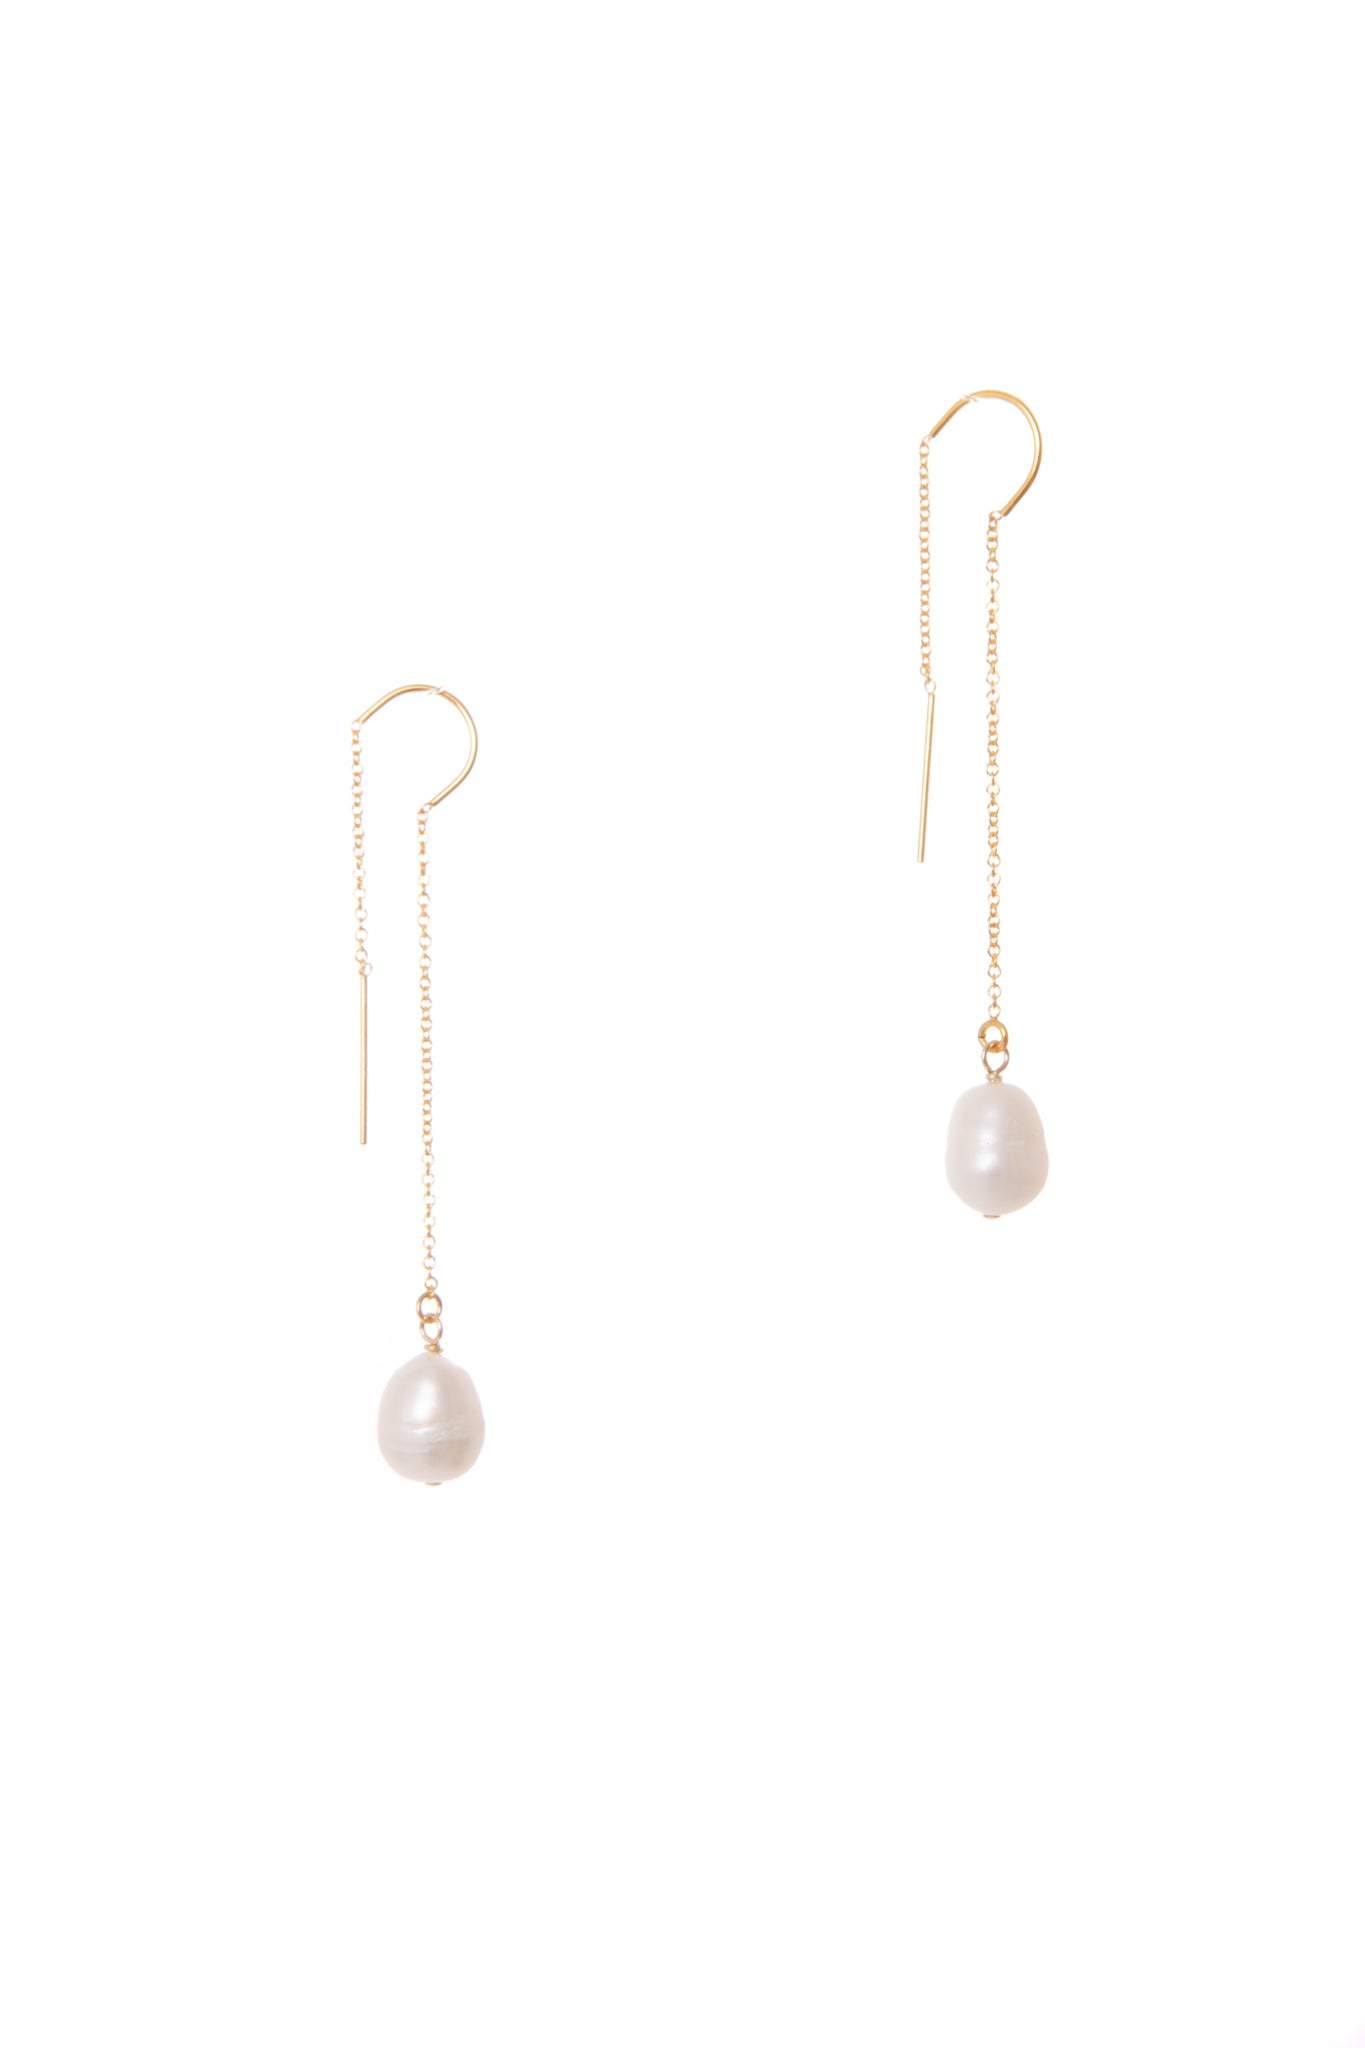 Crafted from organic, freshwater pearls and 14k gold-filled chain, these modern and sophisticated threader earrings add a luxurious touch to your outfit. 